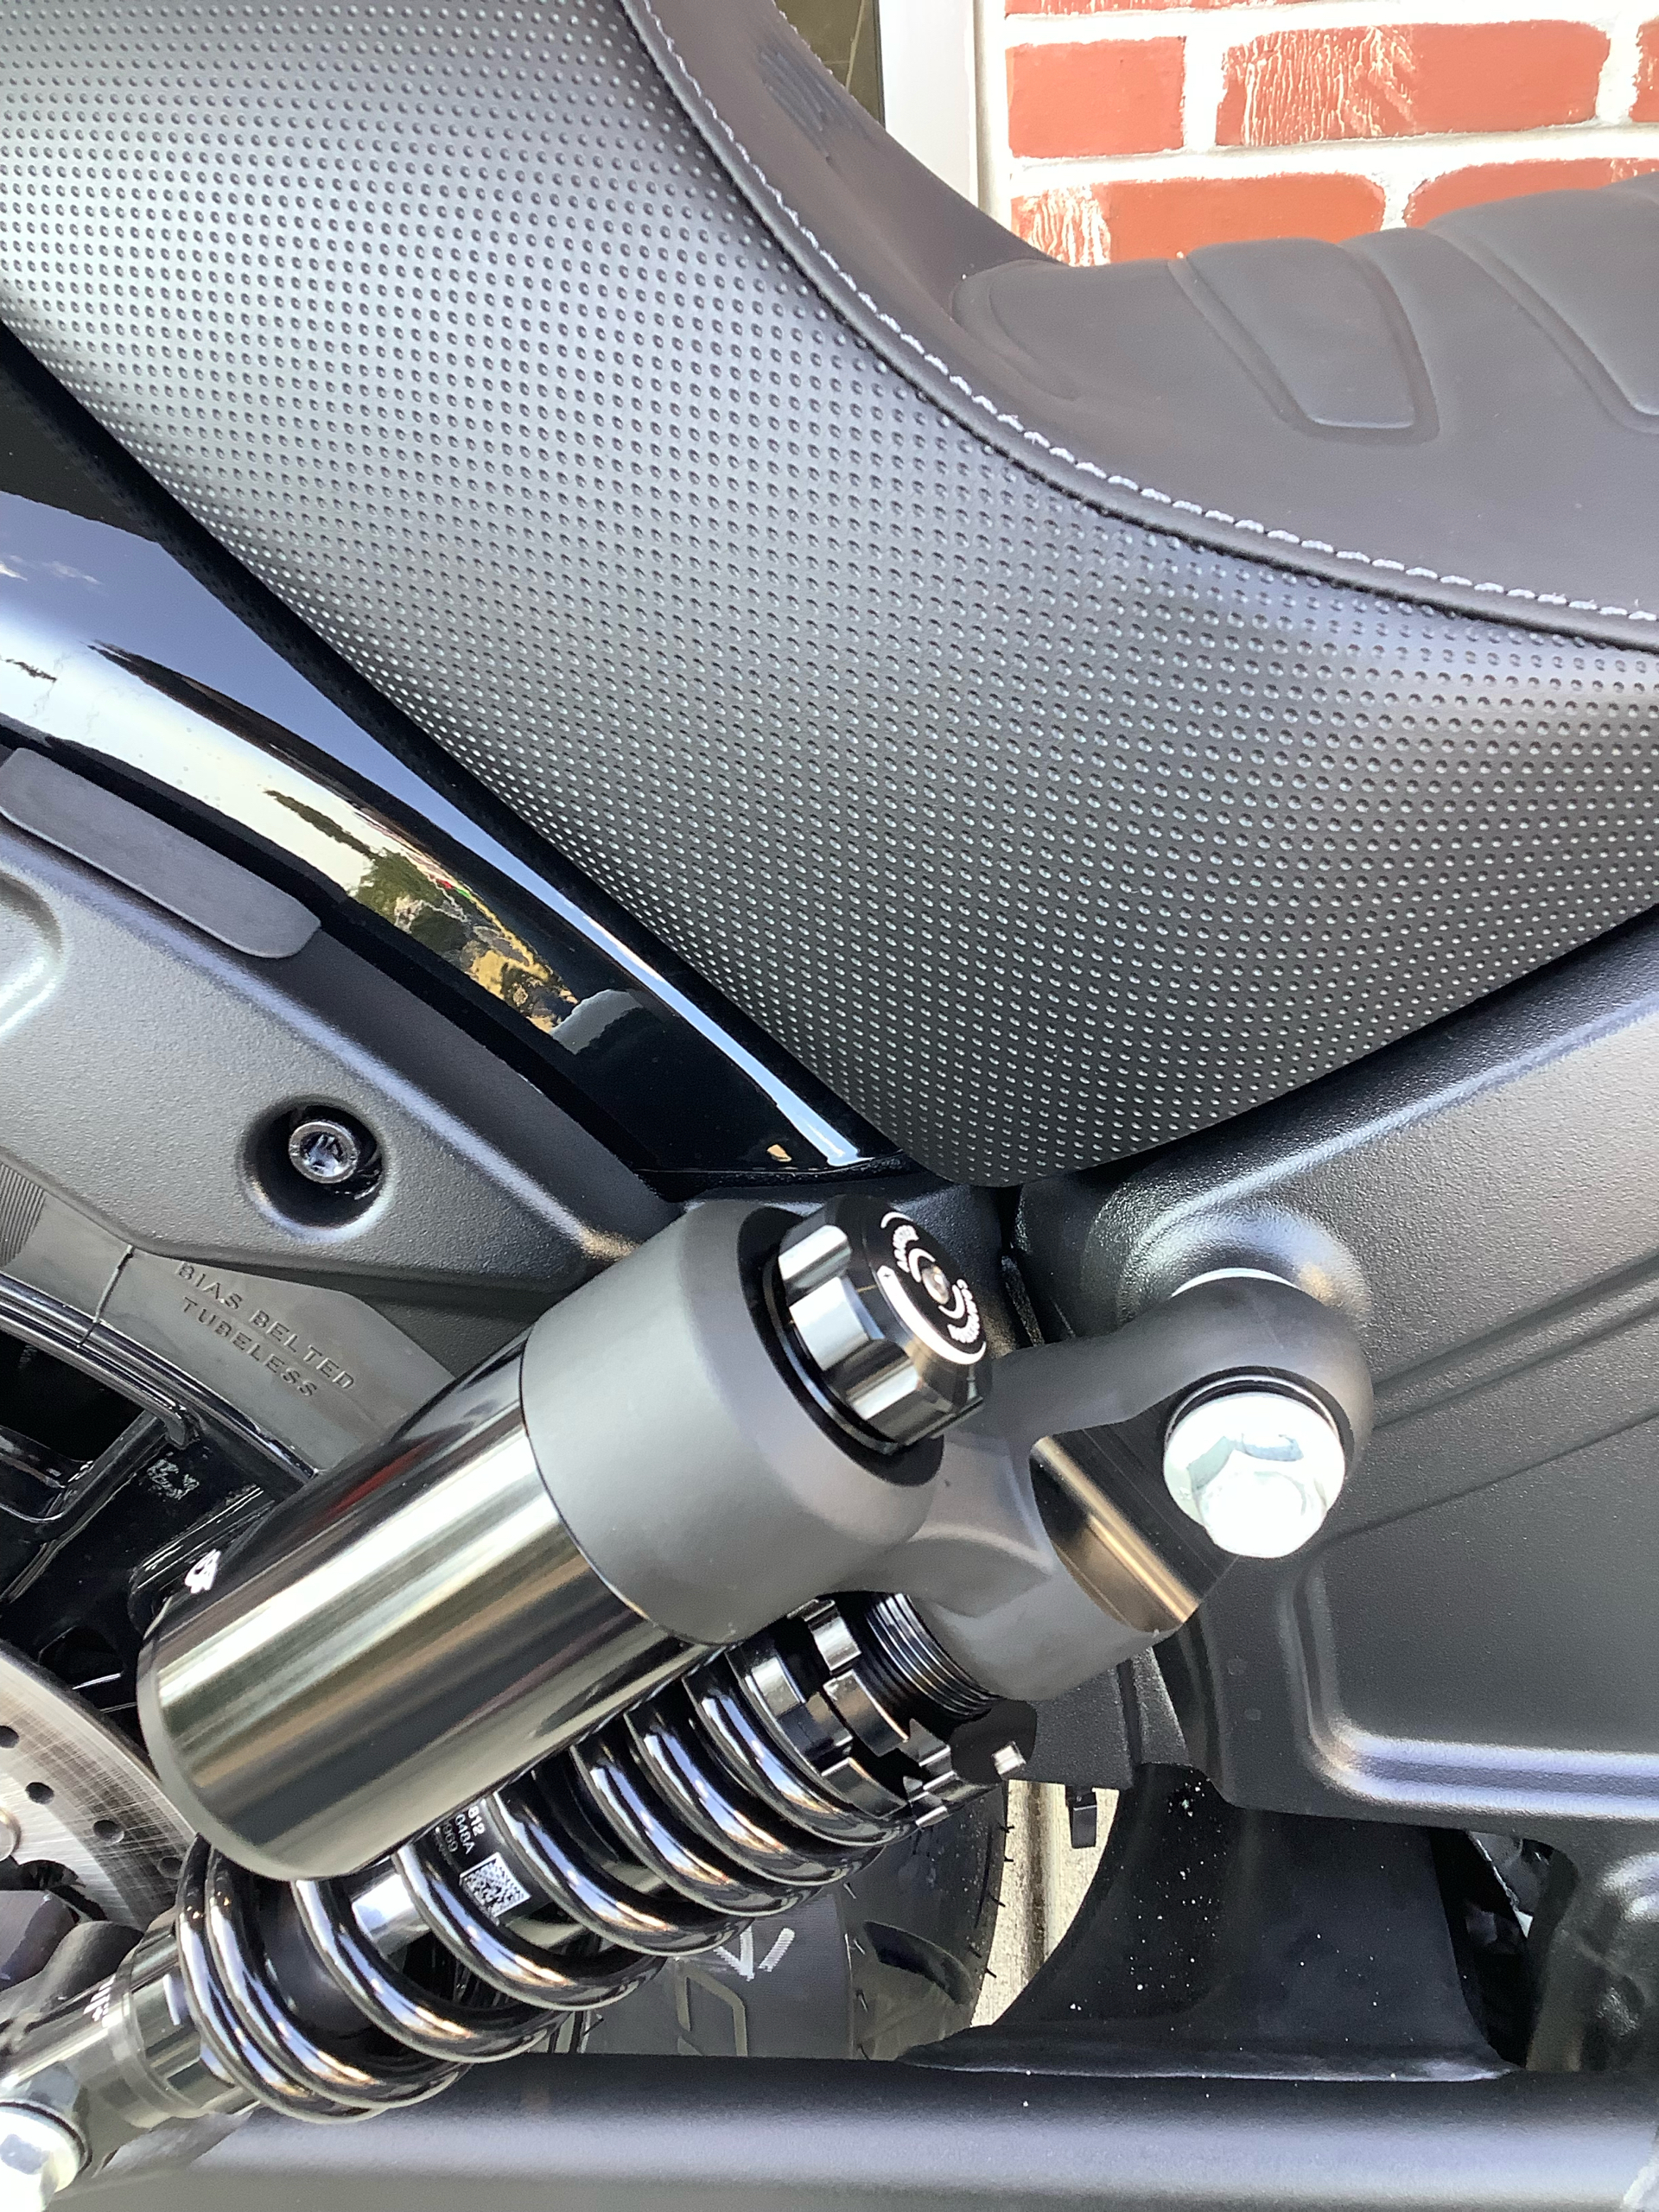 2022 Indian Scout® Rogue ABS in Newport News, Virginia - Photo 7